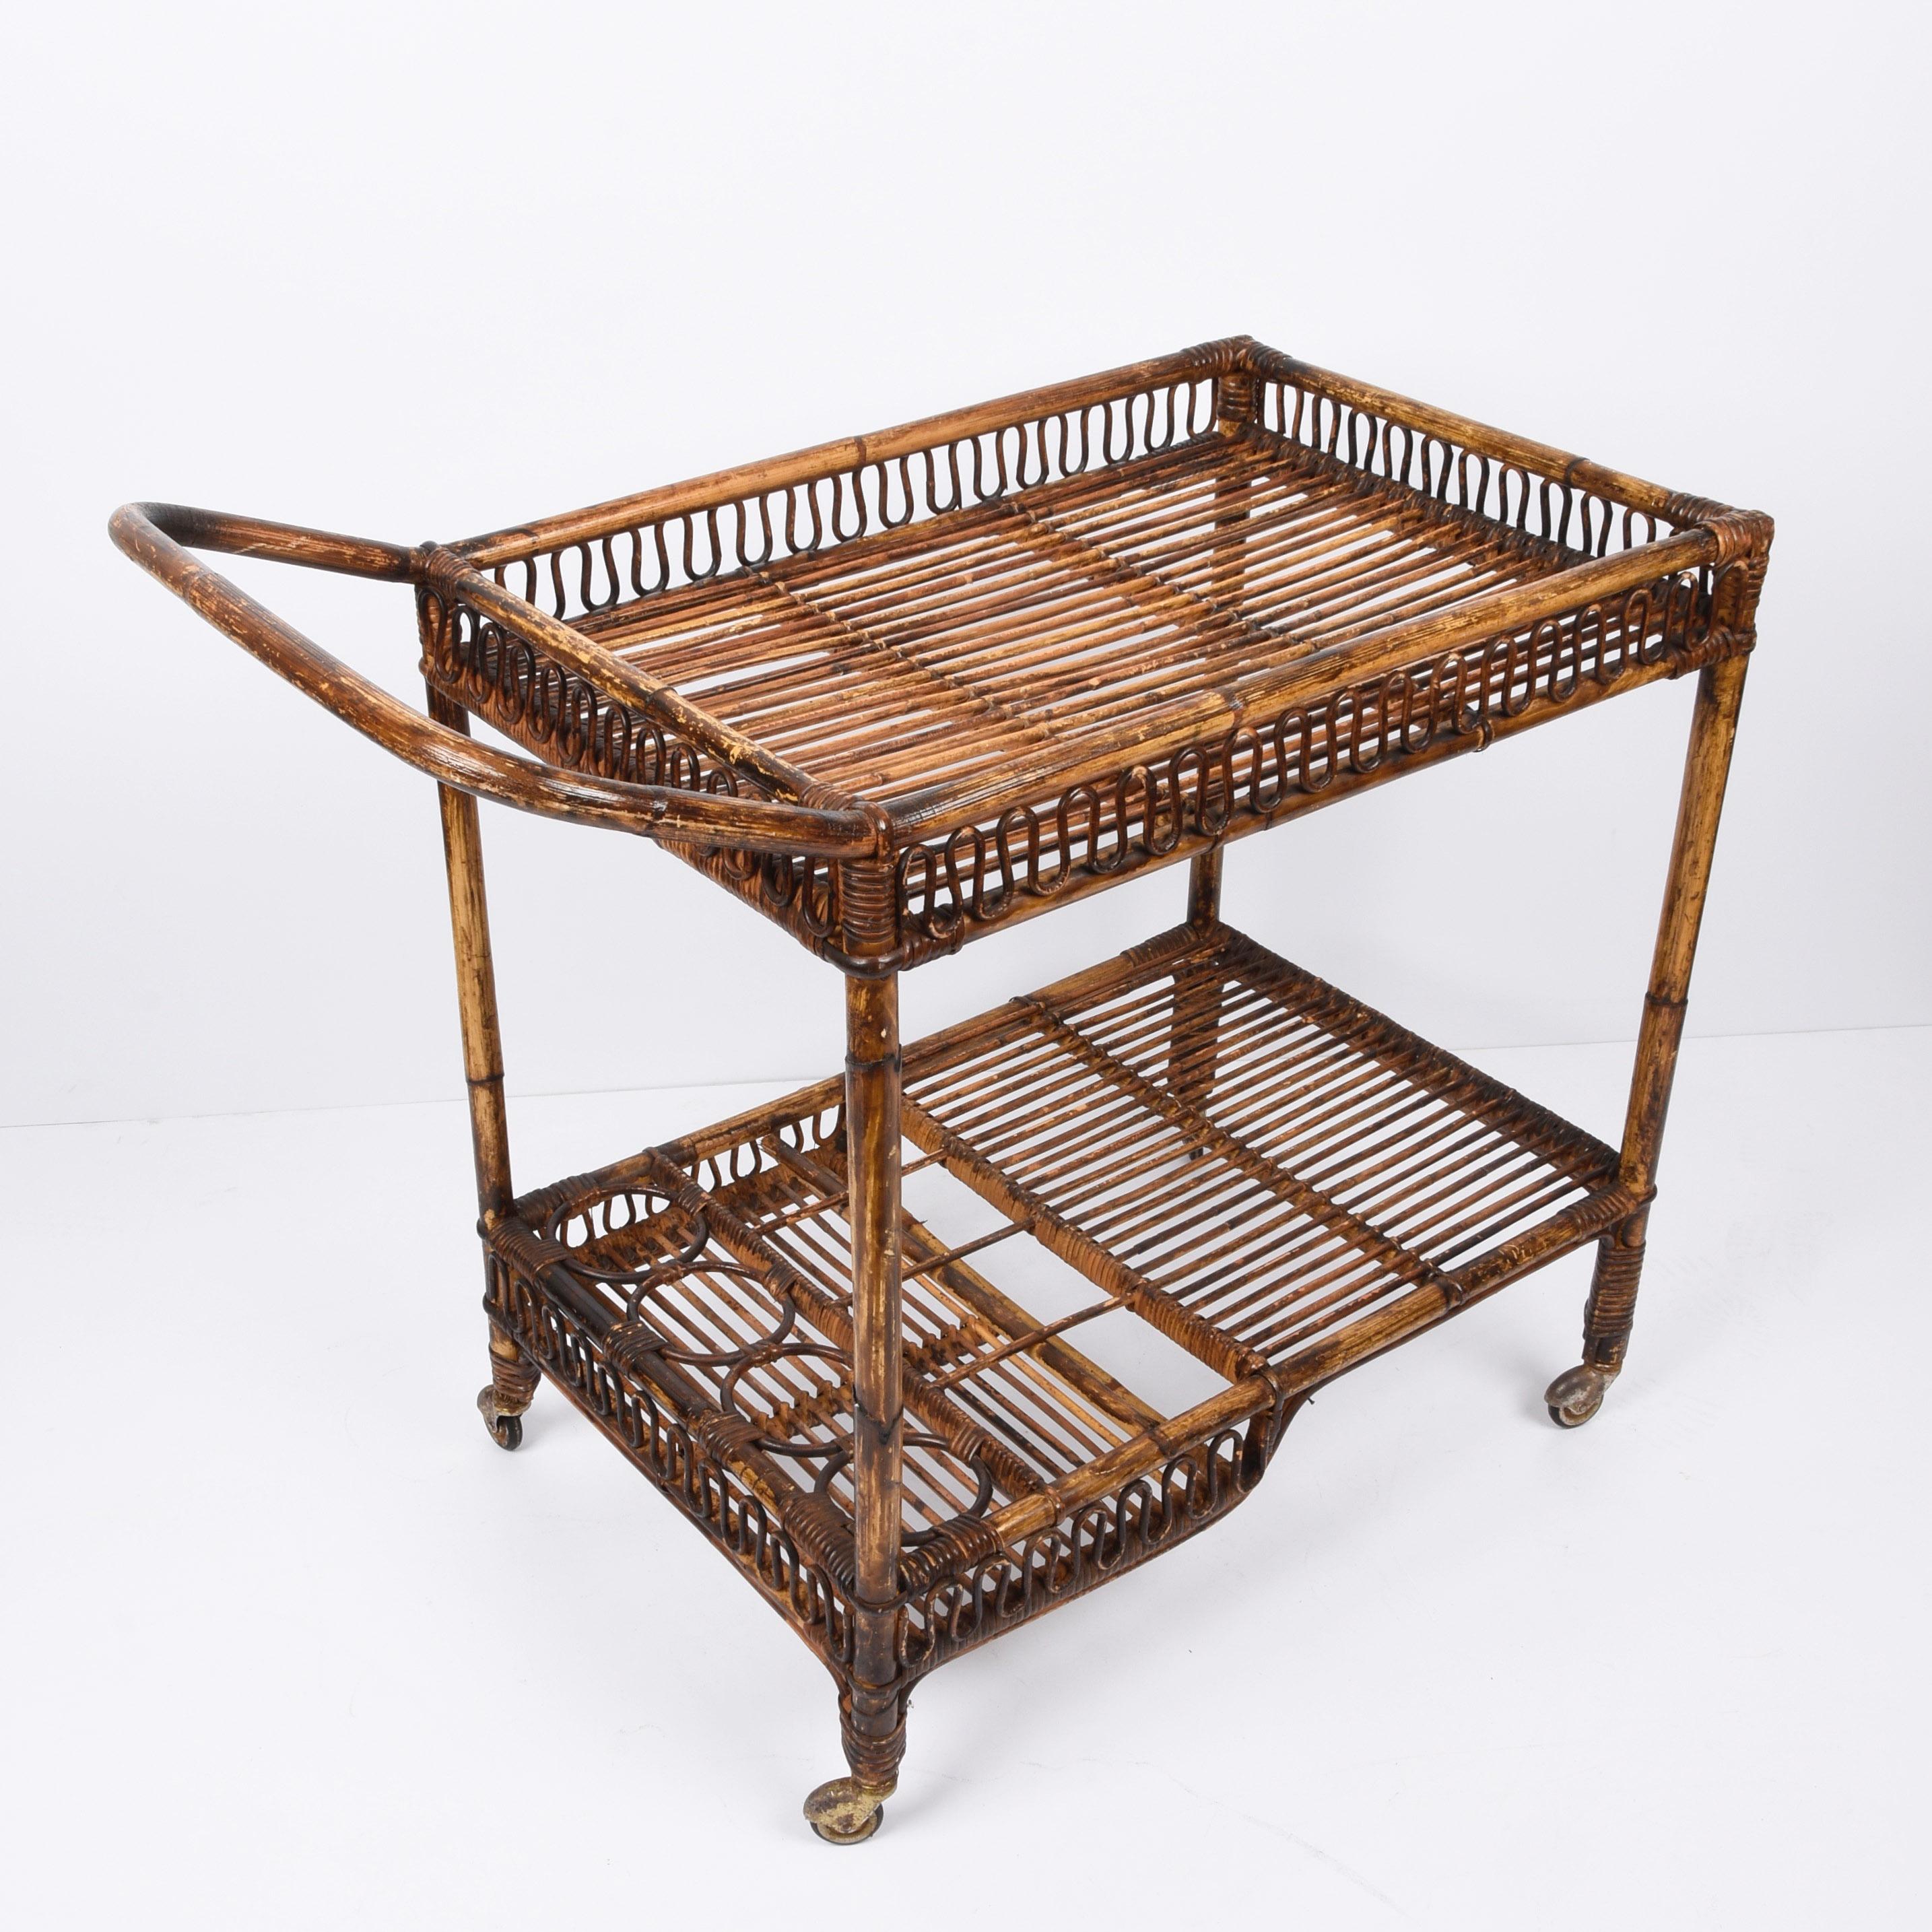 Fabulous midcentury French Riviera rectangular bamboo and rattan trolley bar cart. This amazing piece was designed and produced in France during the 1960s.

This piece is unique as it has the main structure in bamboo and the double level surfaces